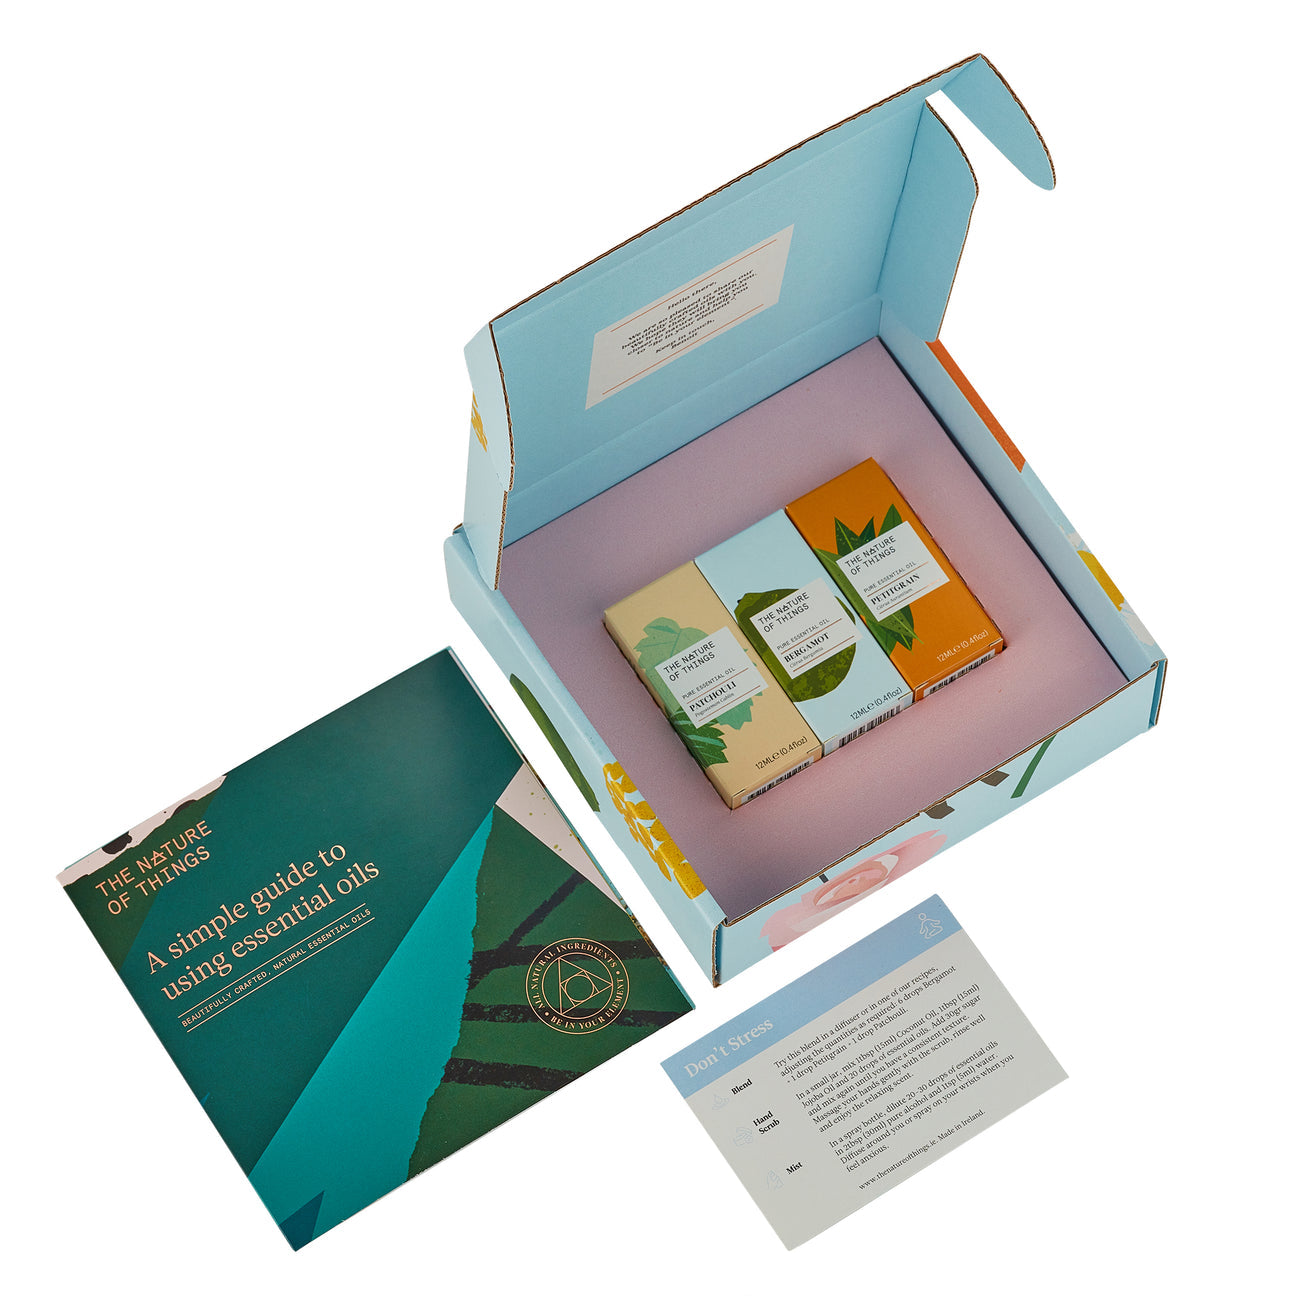 'Don't Stress' Essential oil gift set